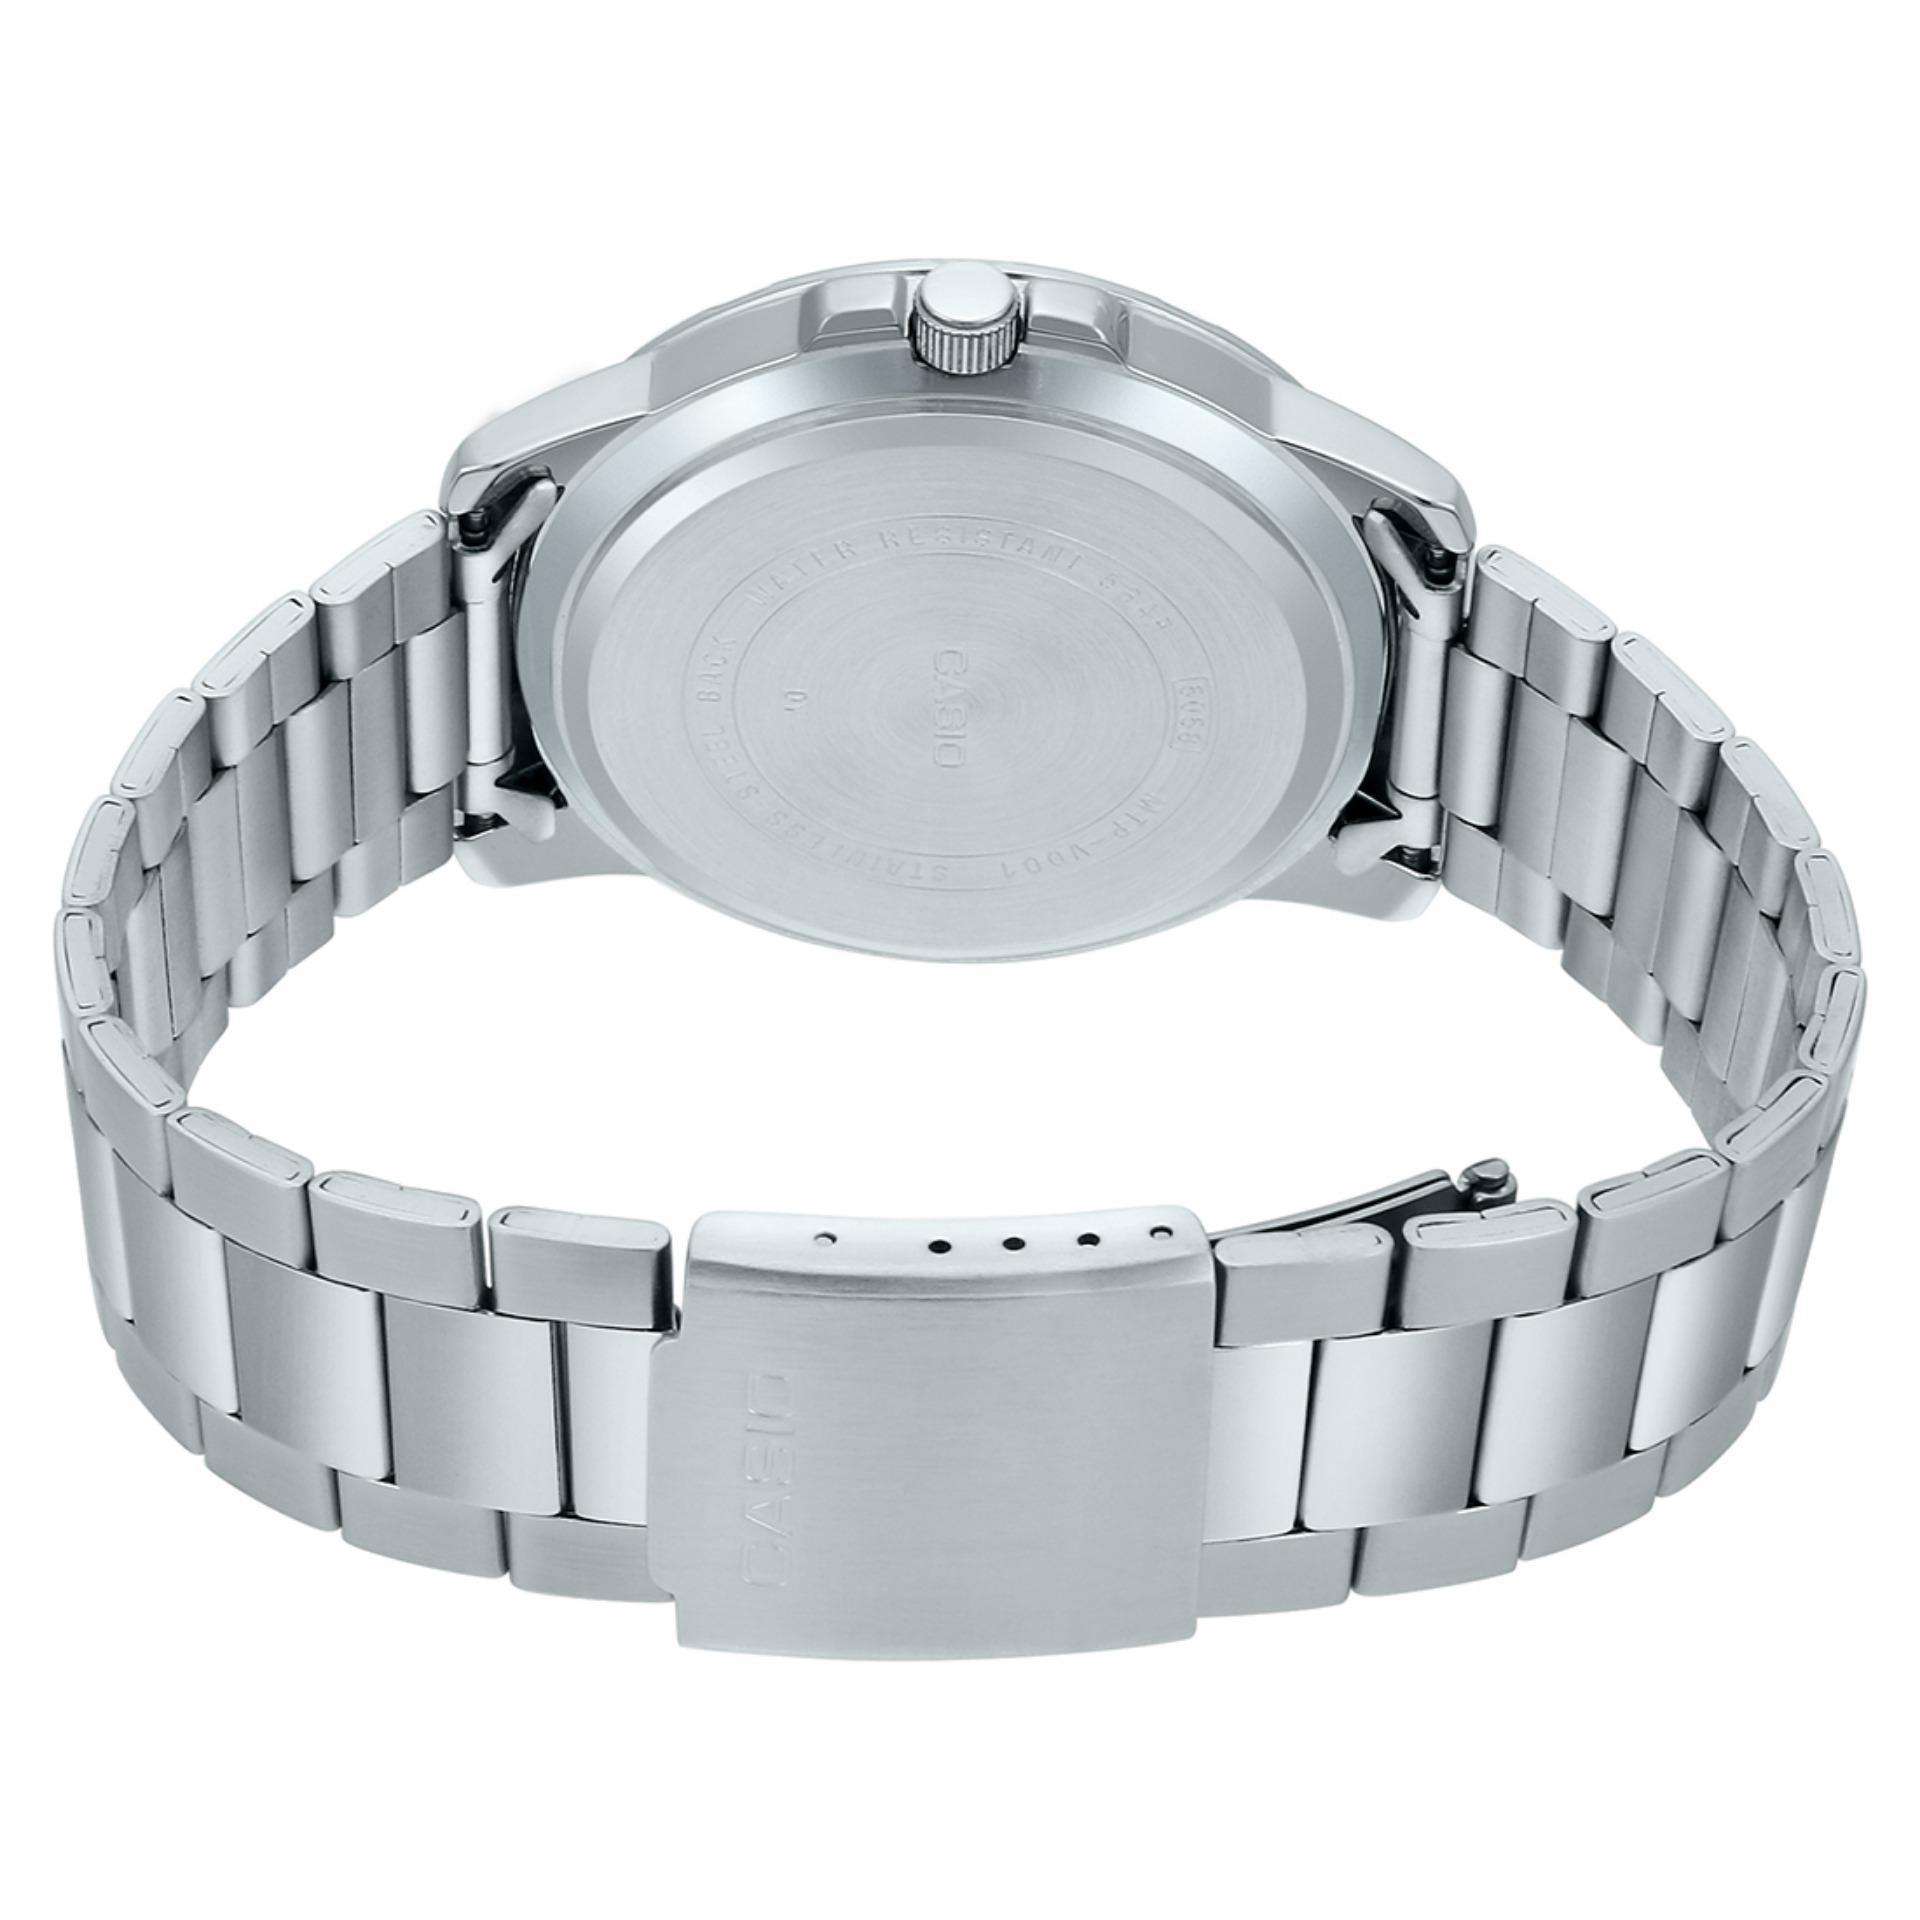 Casio MTP-VD01D-7EVUDF Silver Stainless Watch for Men-Watch Portal Philippines